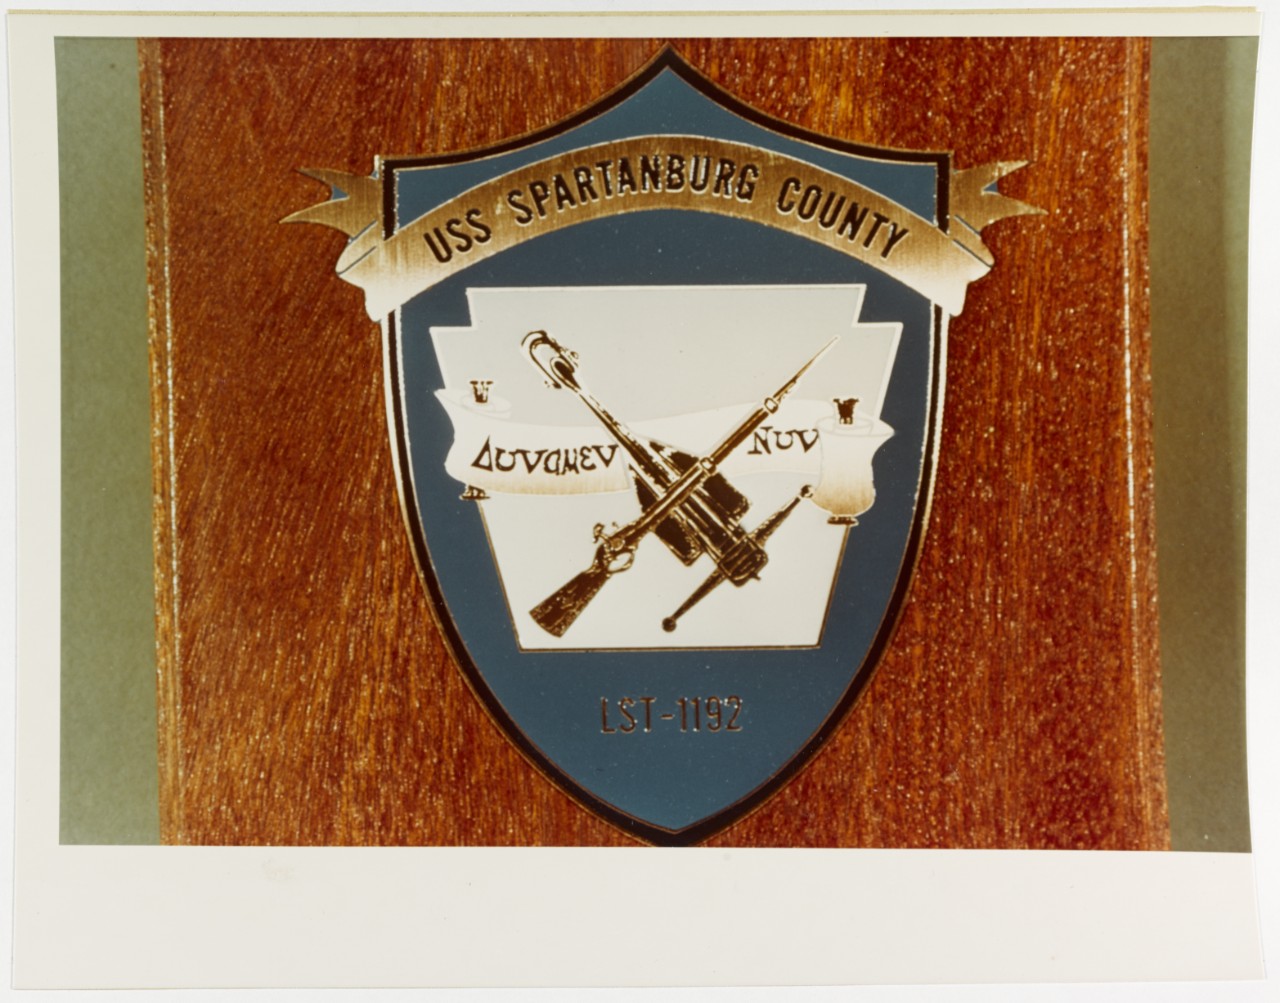 Insignia:  USS SPARTANBURG COUNTY (LST-1192)